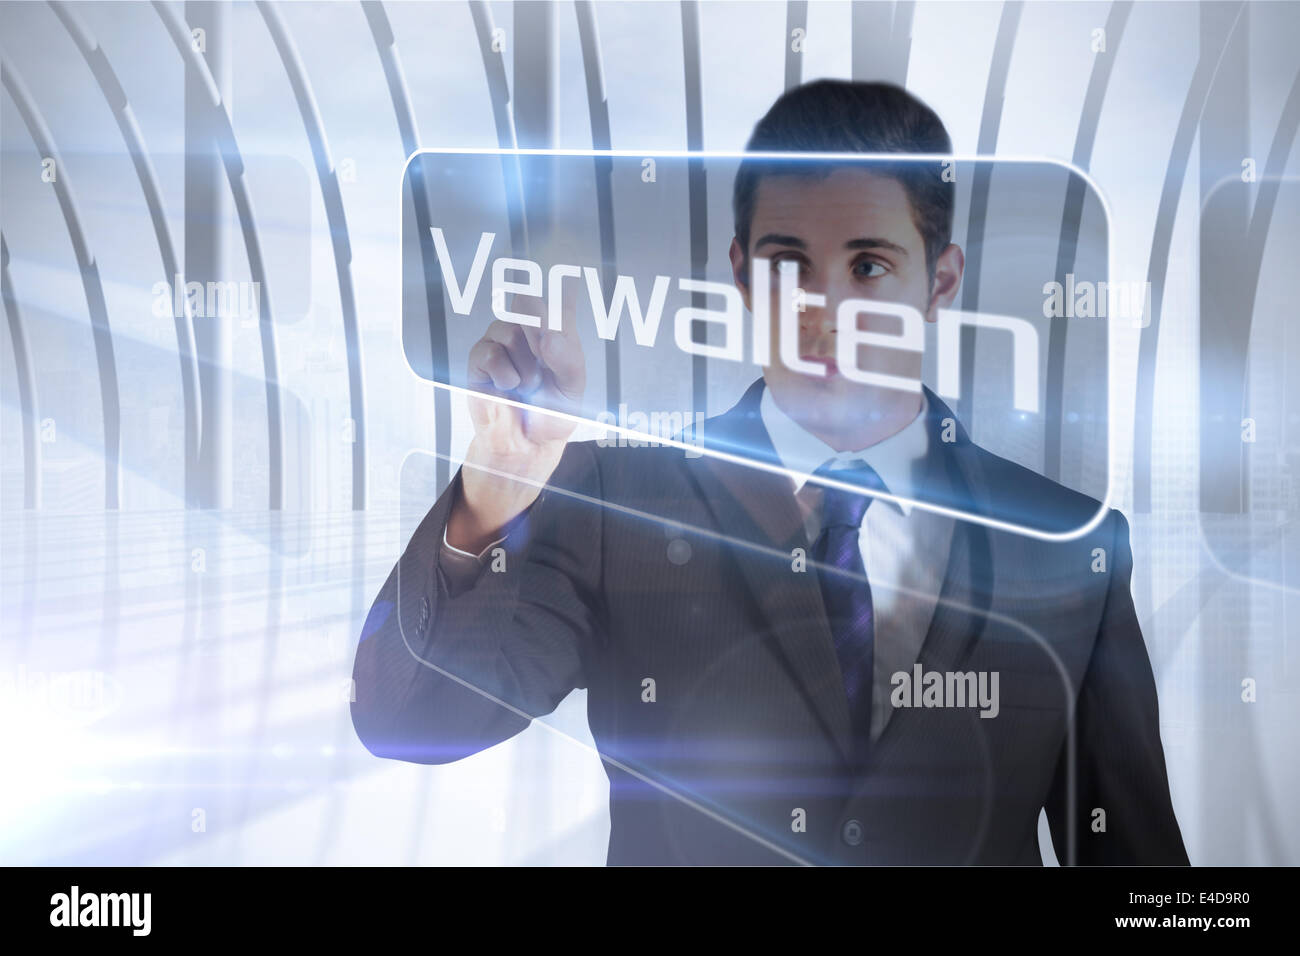 Businessman presenting the word manage in german Stock Photo